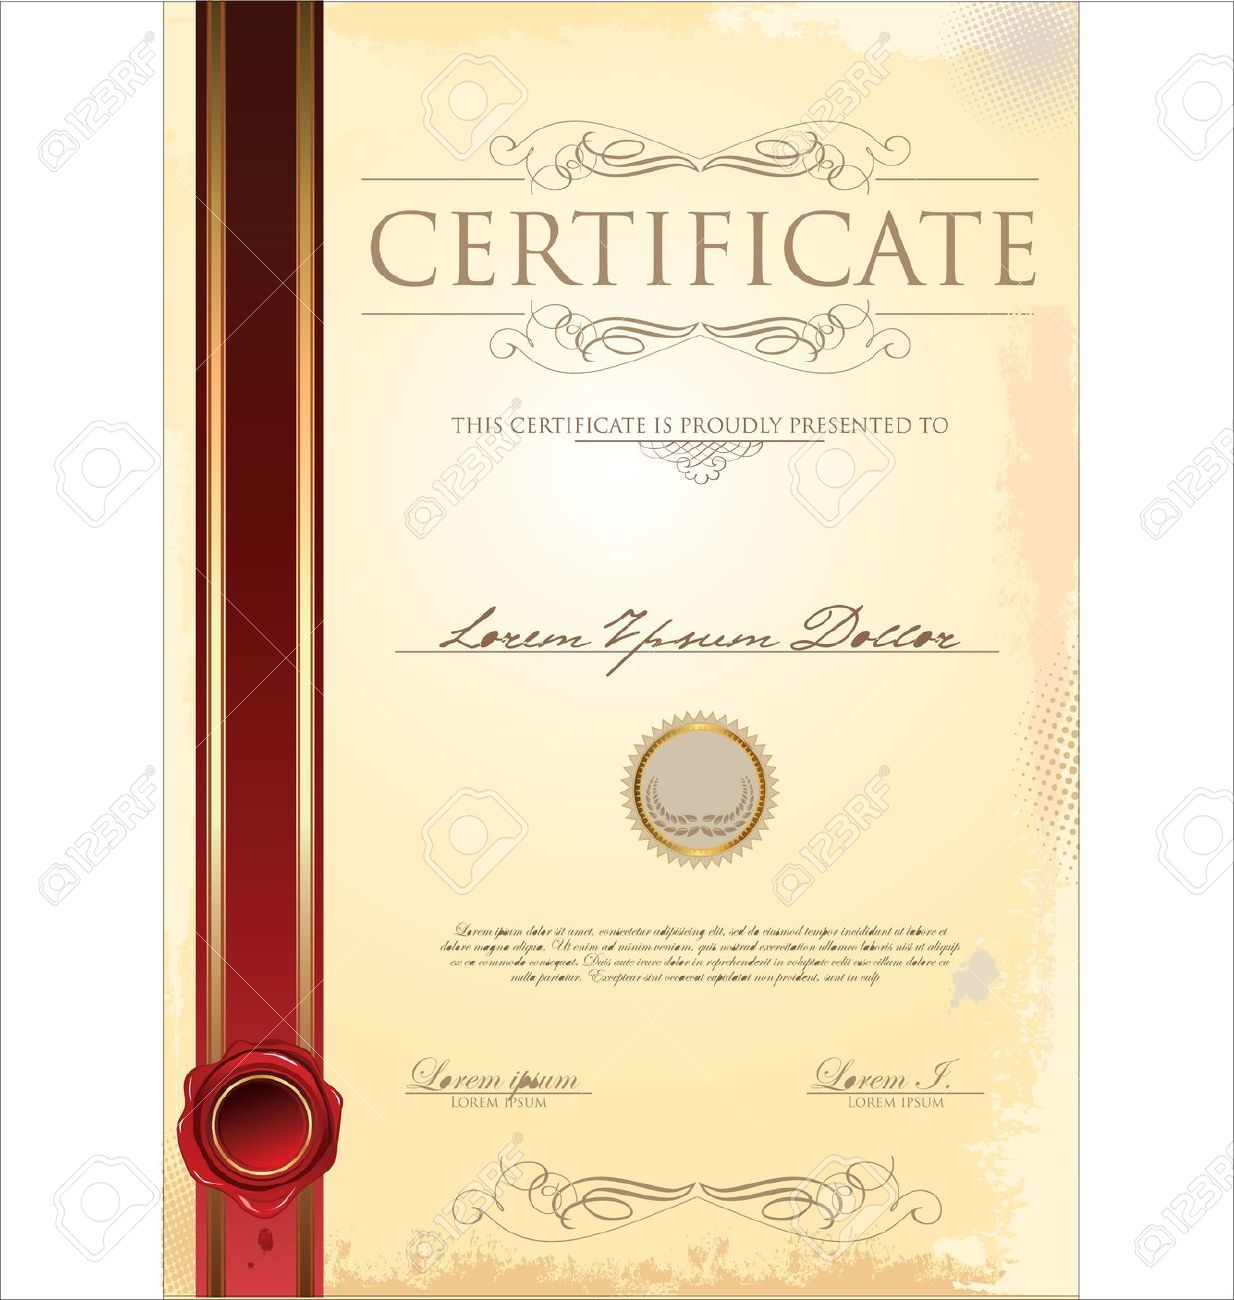 Bunch Ideas For Scroll Certificate Templates Also Sample Inside Certificate Scroll Template